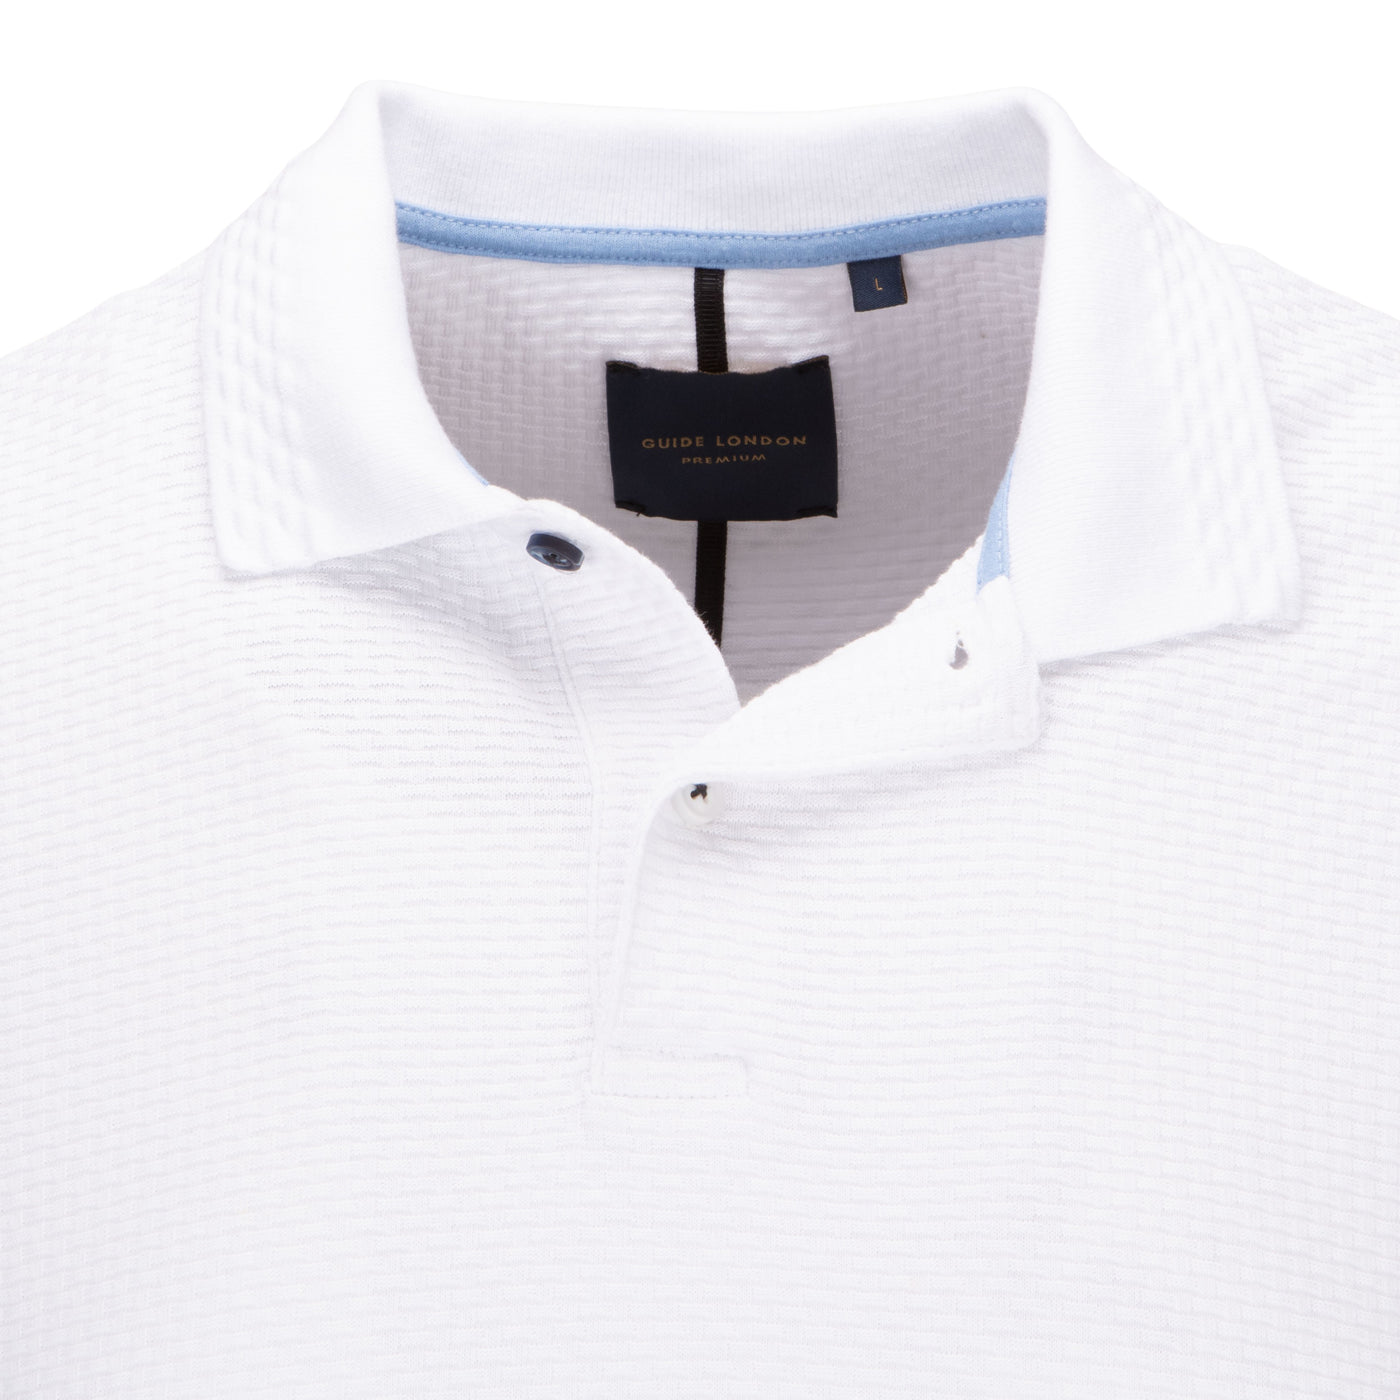 Classic Polo with Subtle Inner Collar Detail